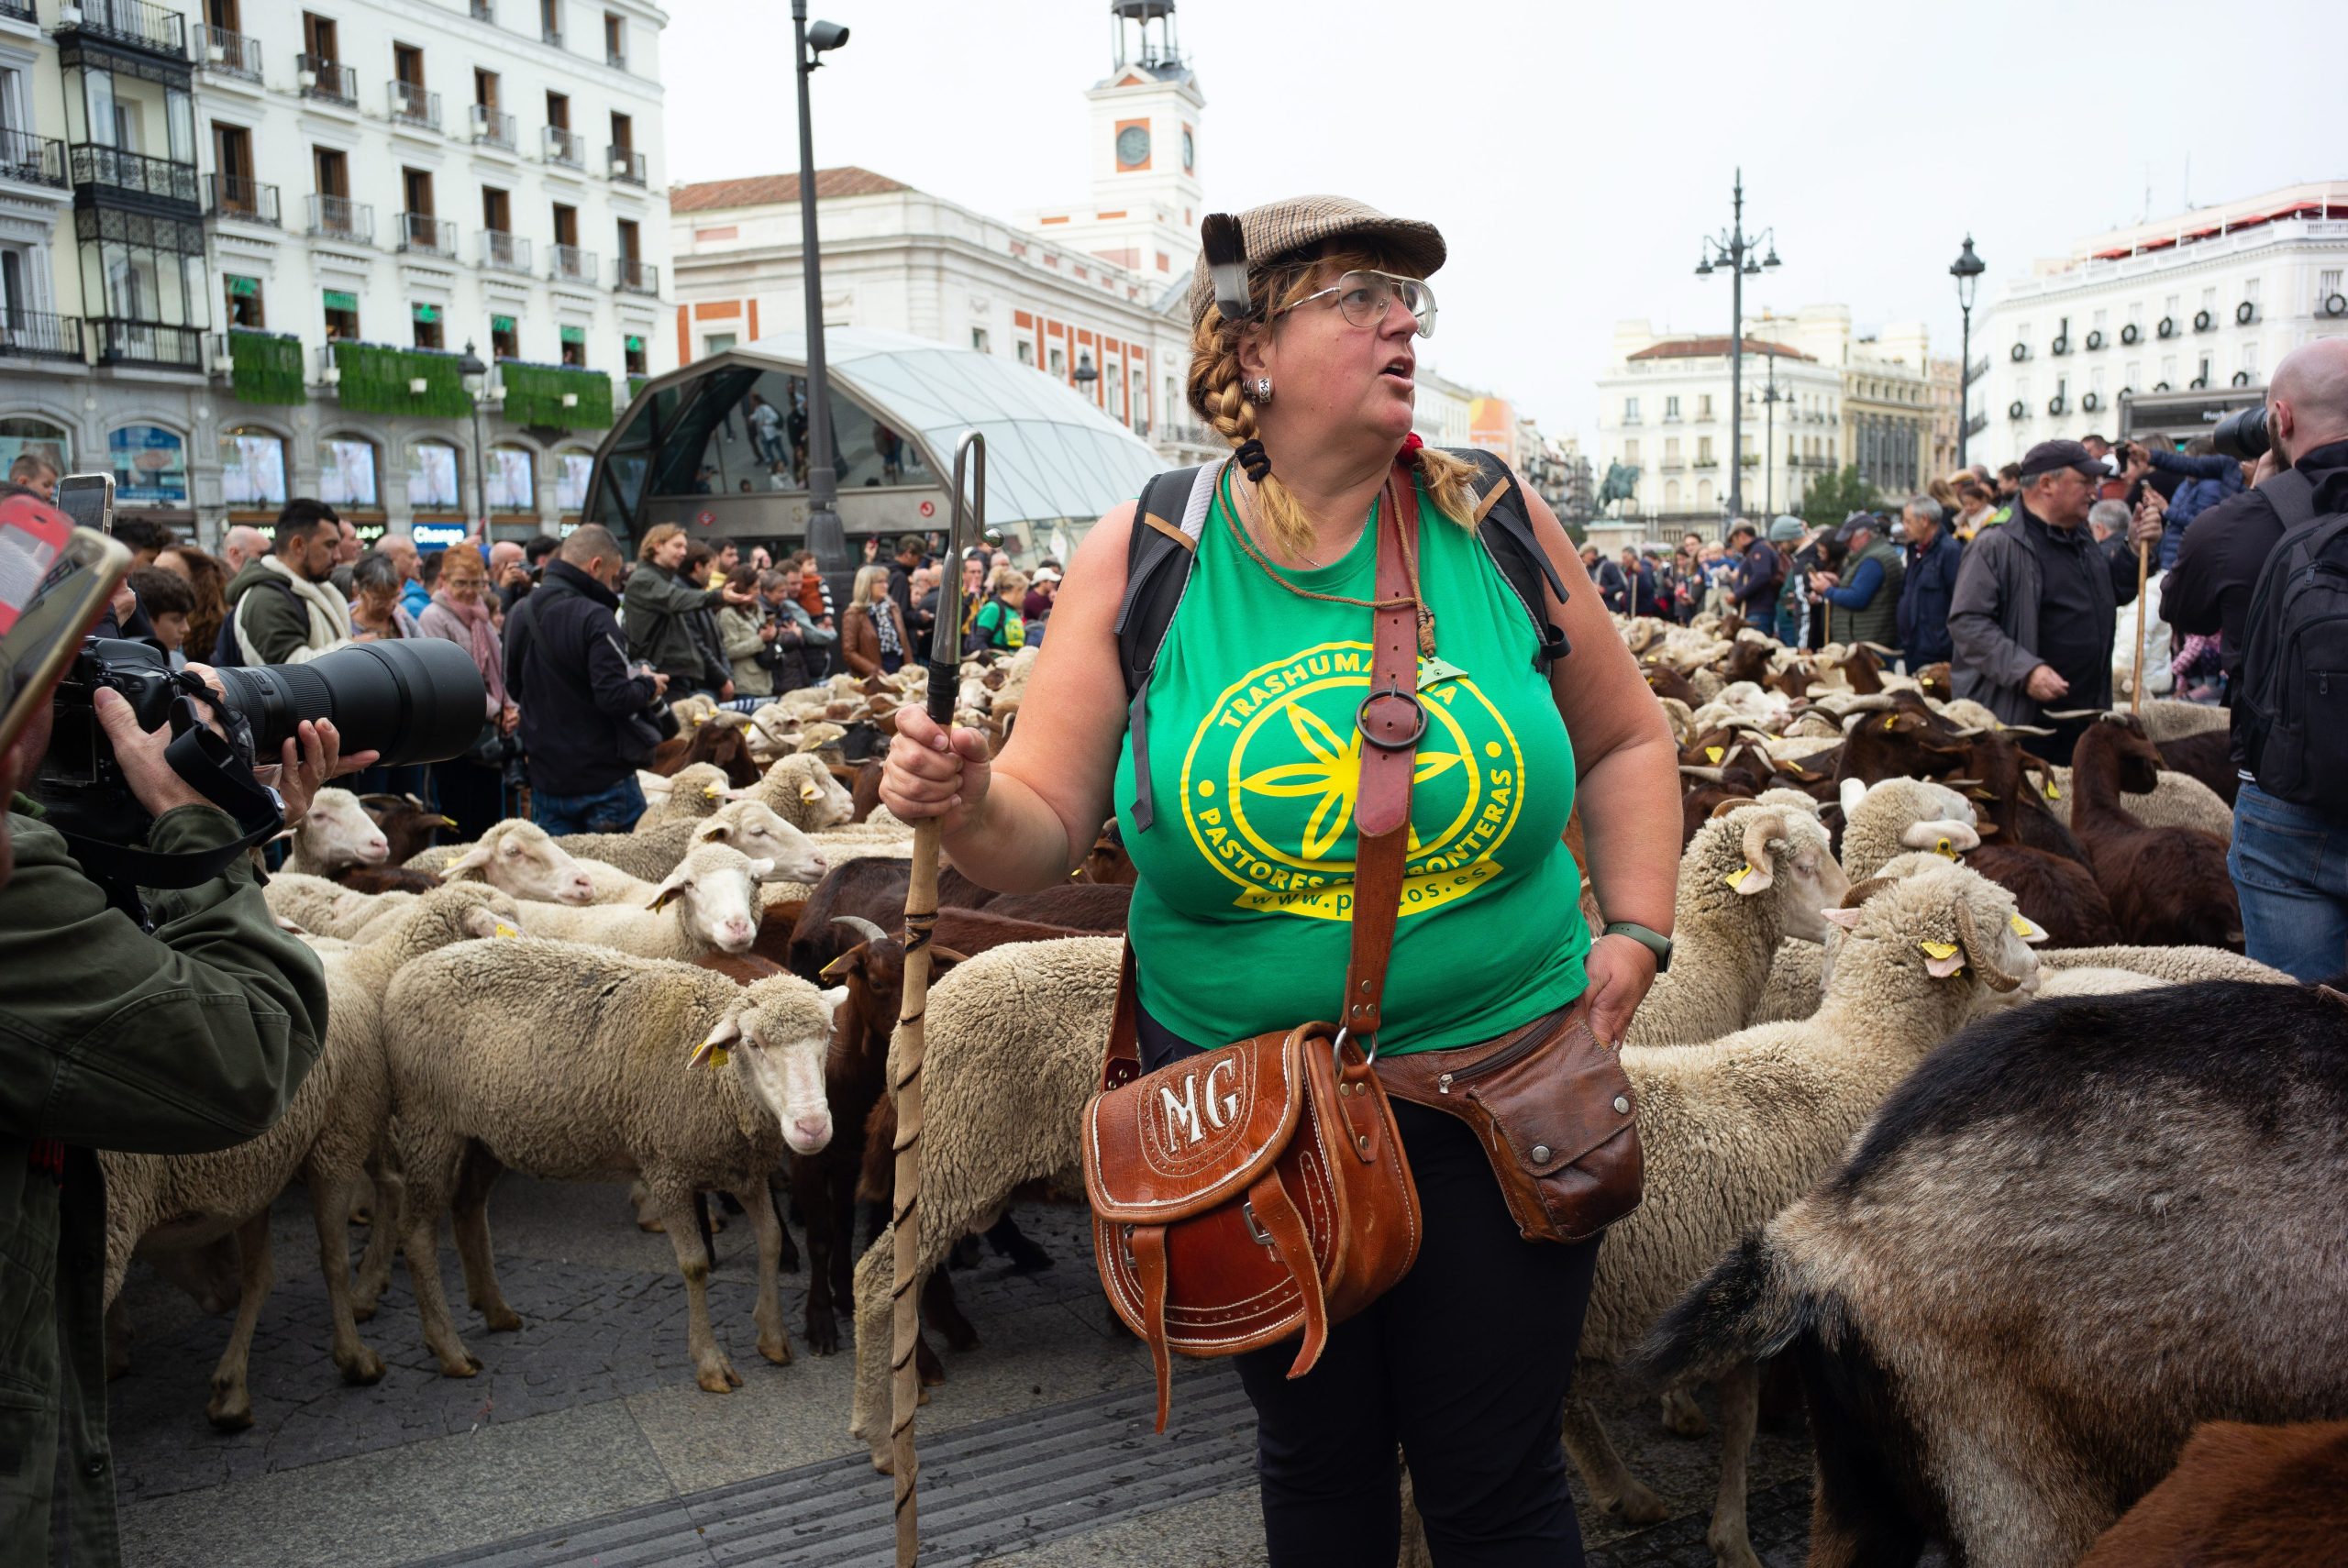 Some 1,200 sheep march through the streets of Spain’s capital: Annual parade in Madrid is led by a woman for the first time